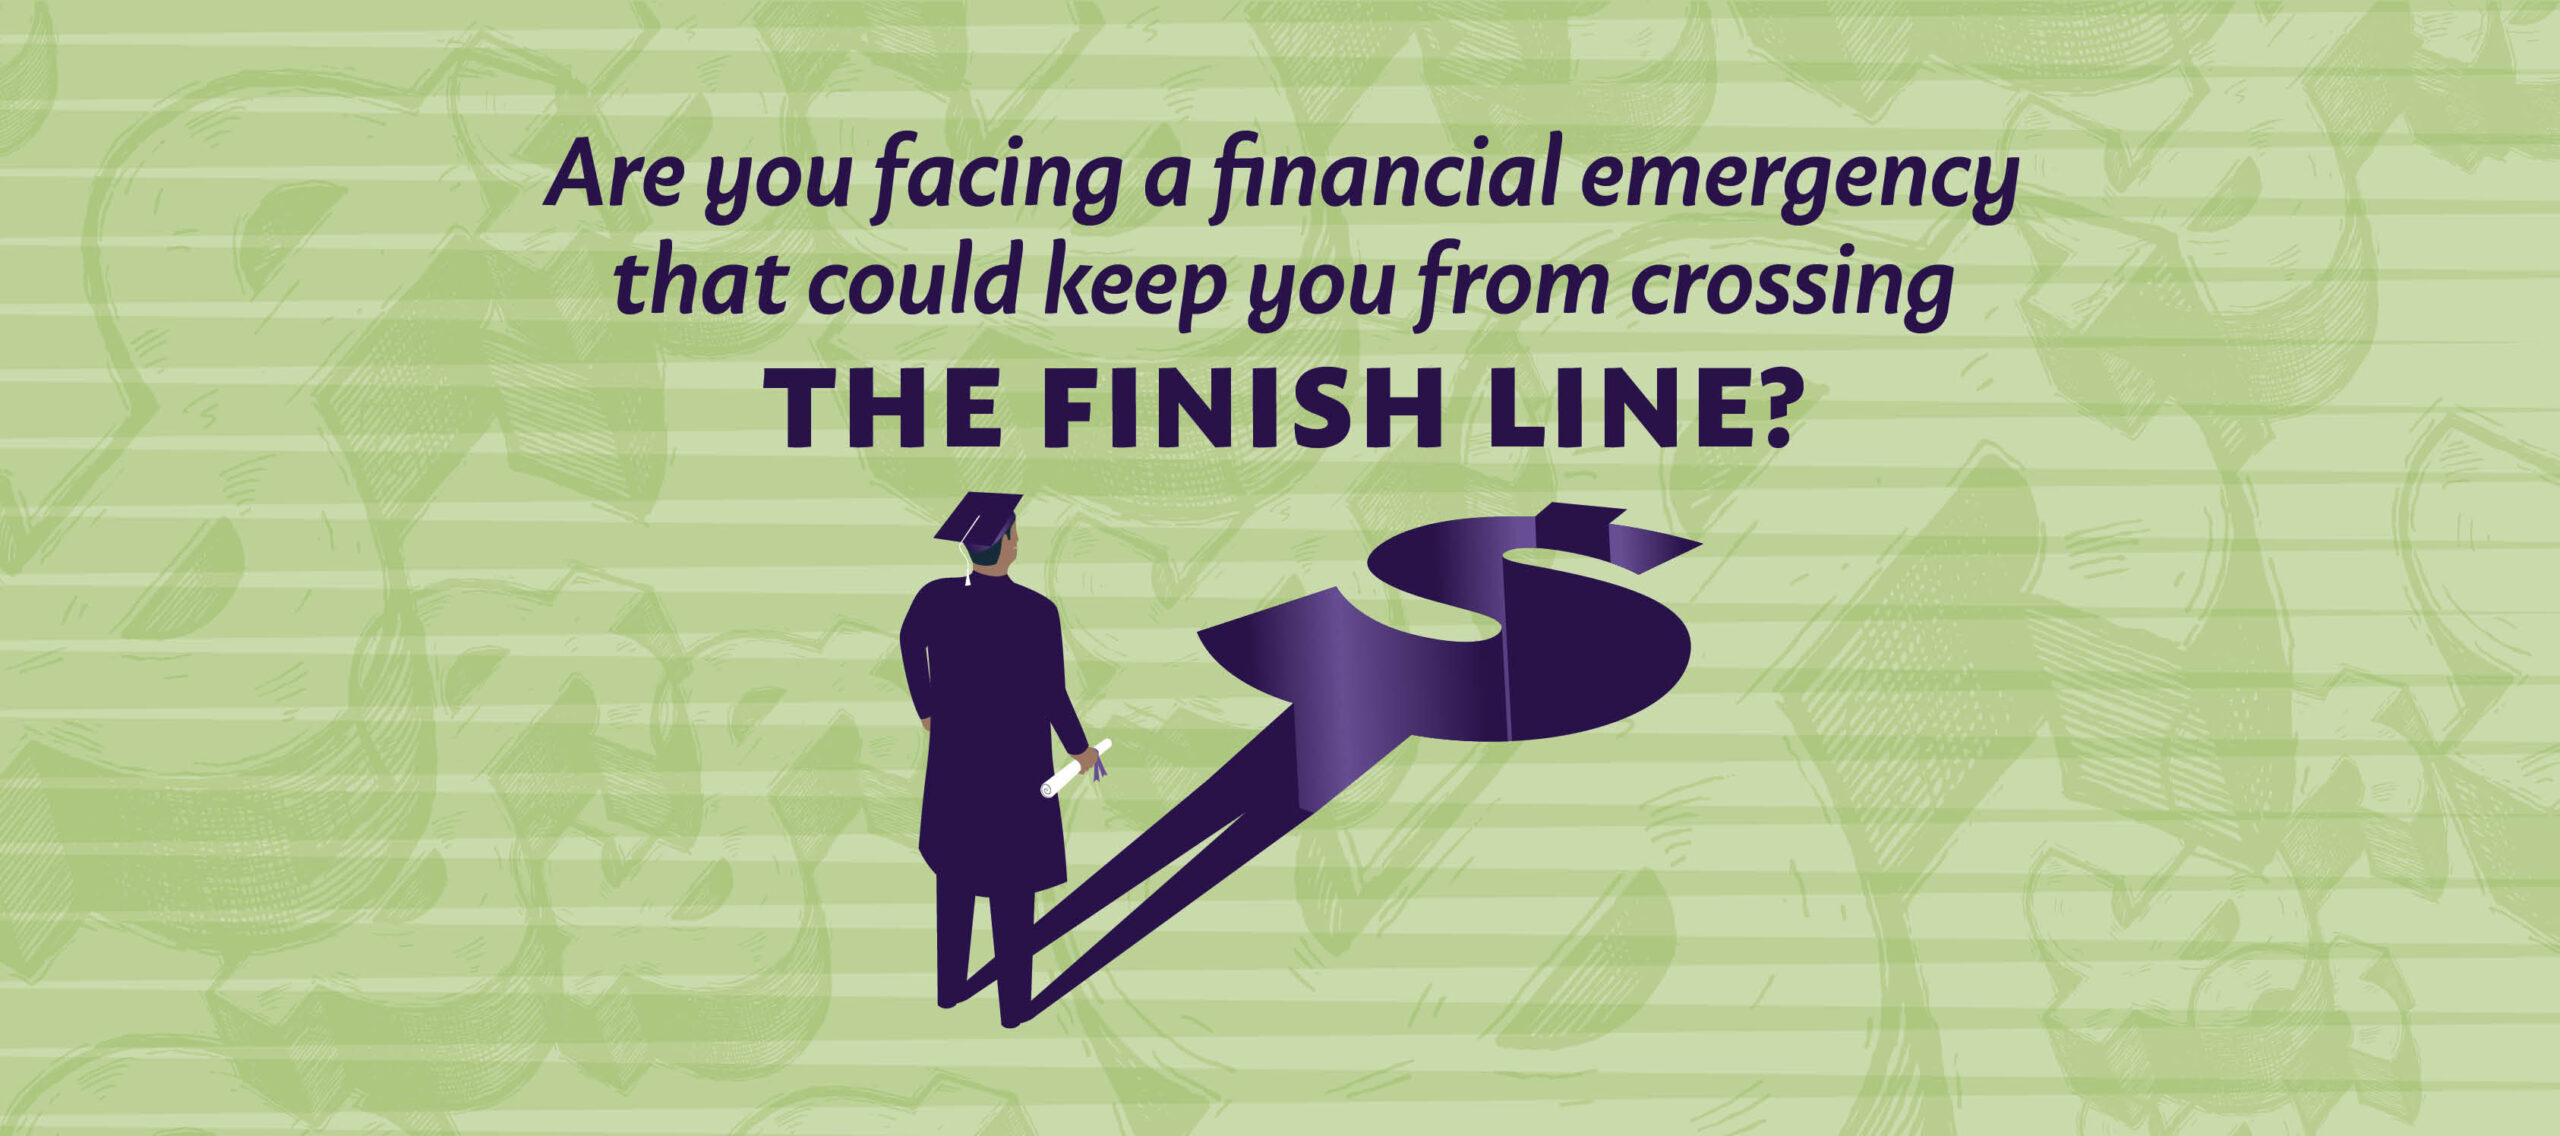 Are you facing a financial emergency that could keep you from crossing the finish line?